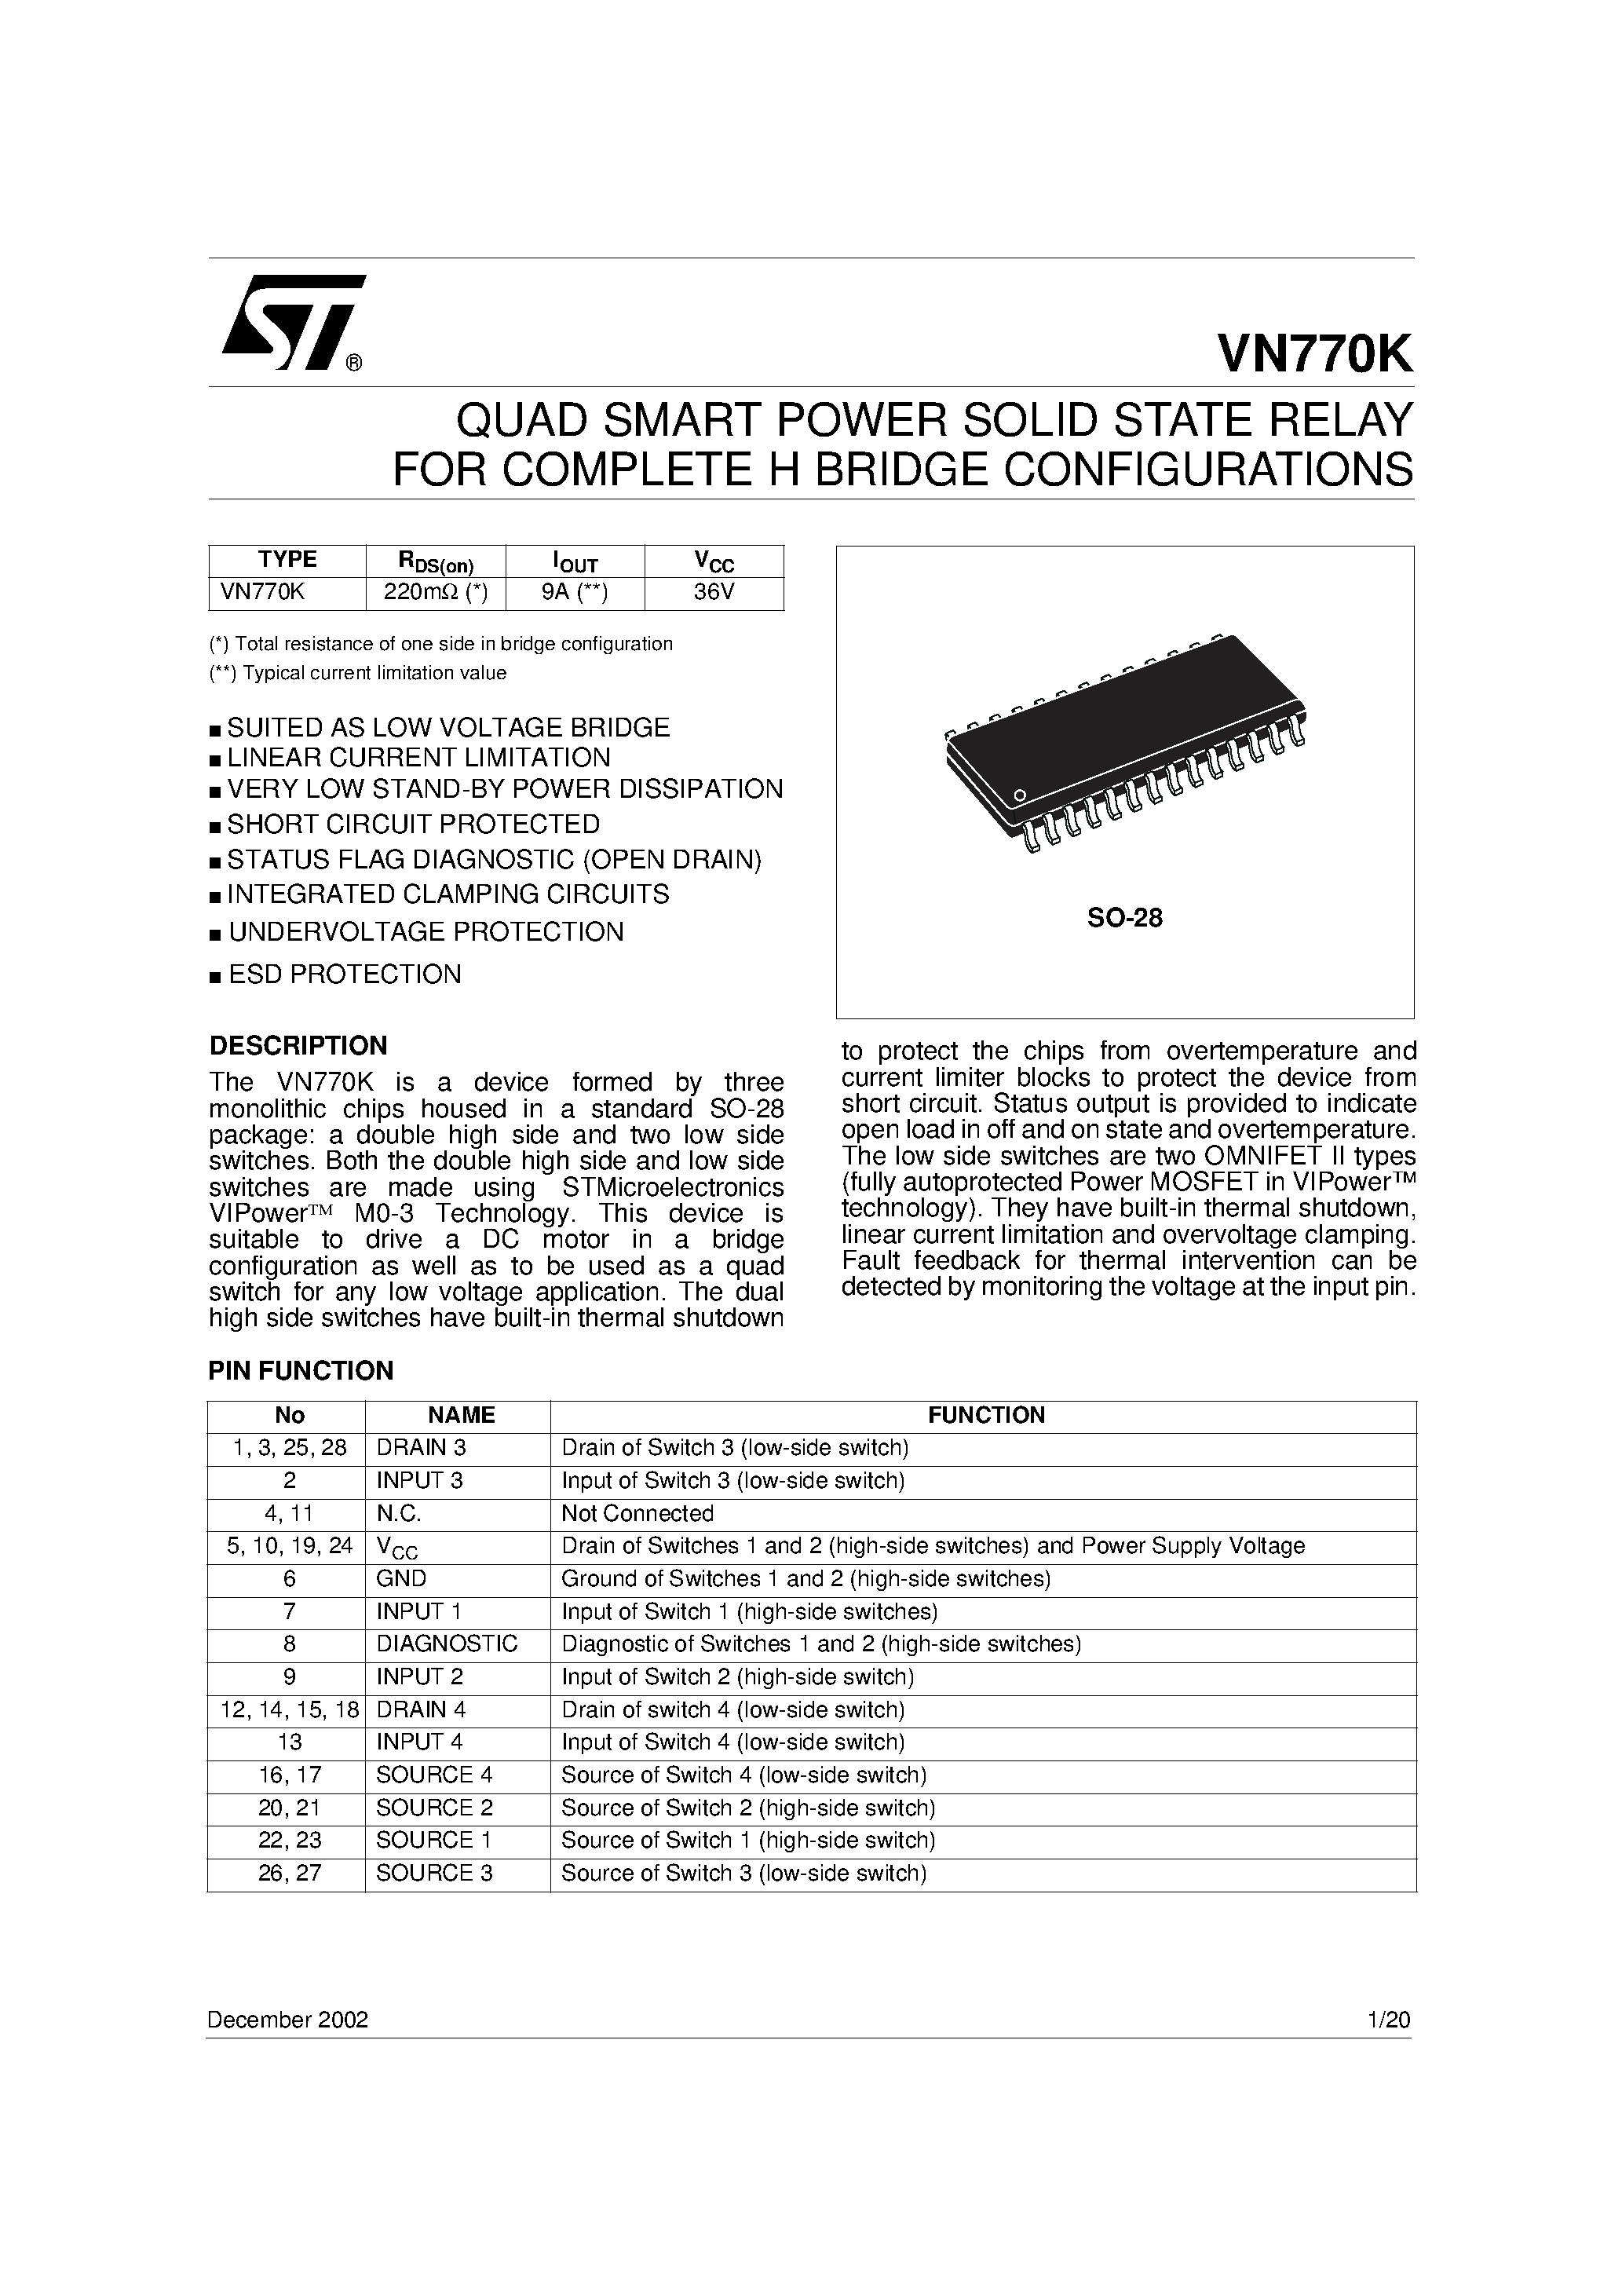 Даташит VN770K - QUAD SMART POWER SOLID STATE RELAY FOR COMPLETE H BRIDGE CONFIGURATIONS страница 1